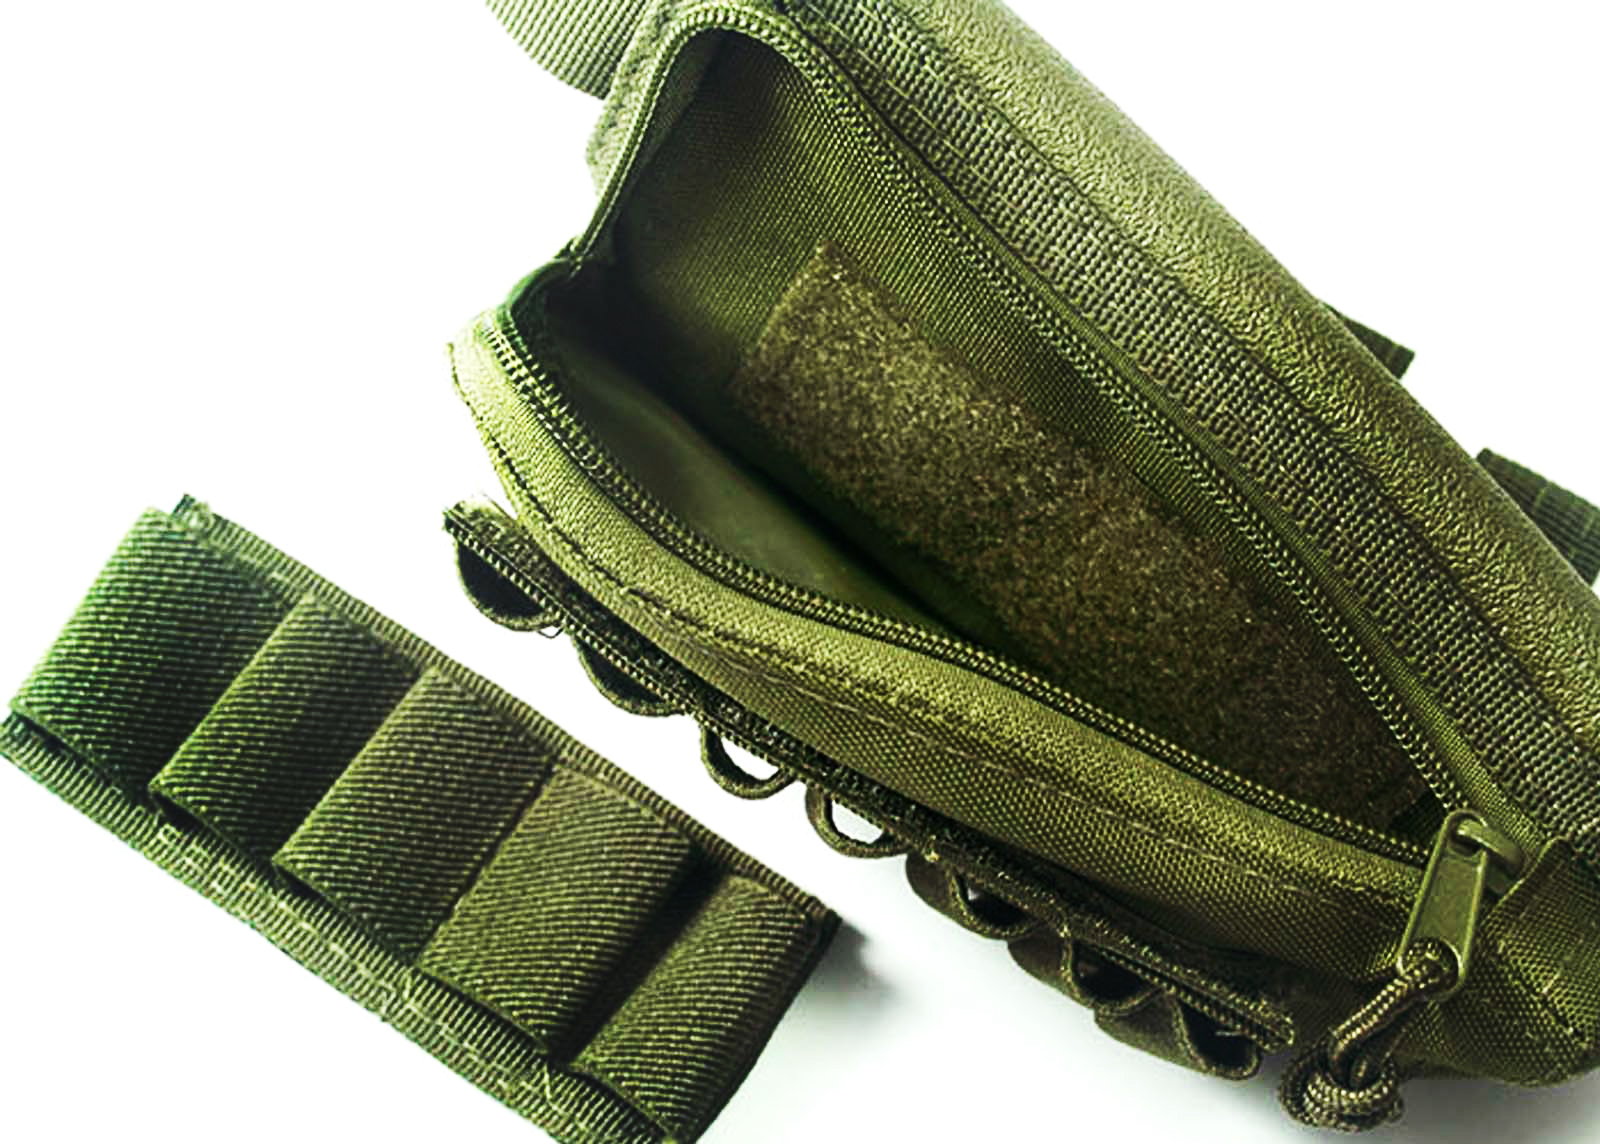 Rifle Stock Ammo Pouch (OD) - Modify Airsoft Accessories